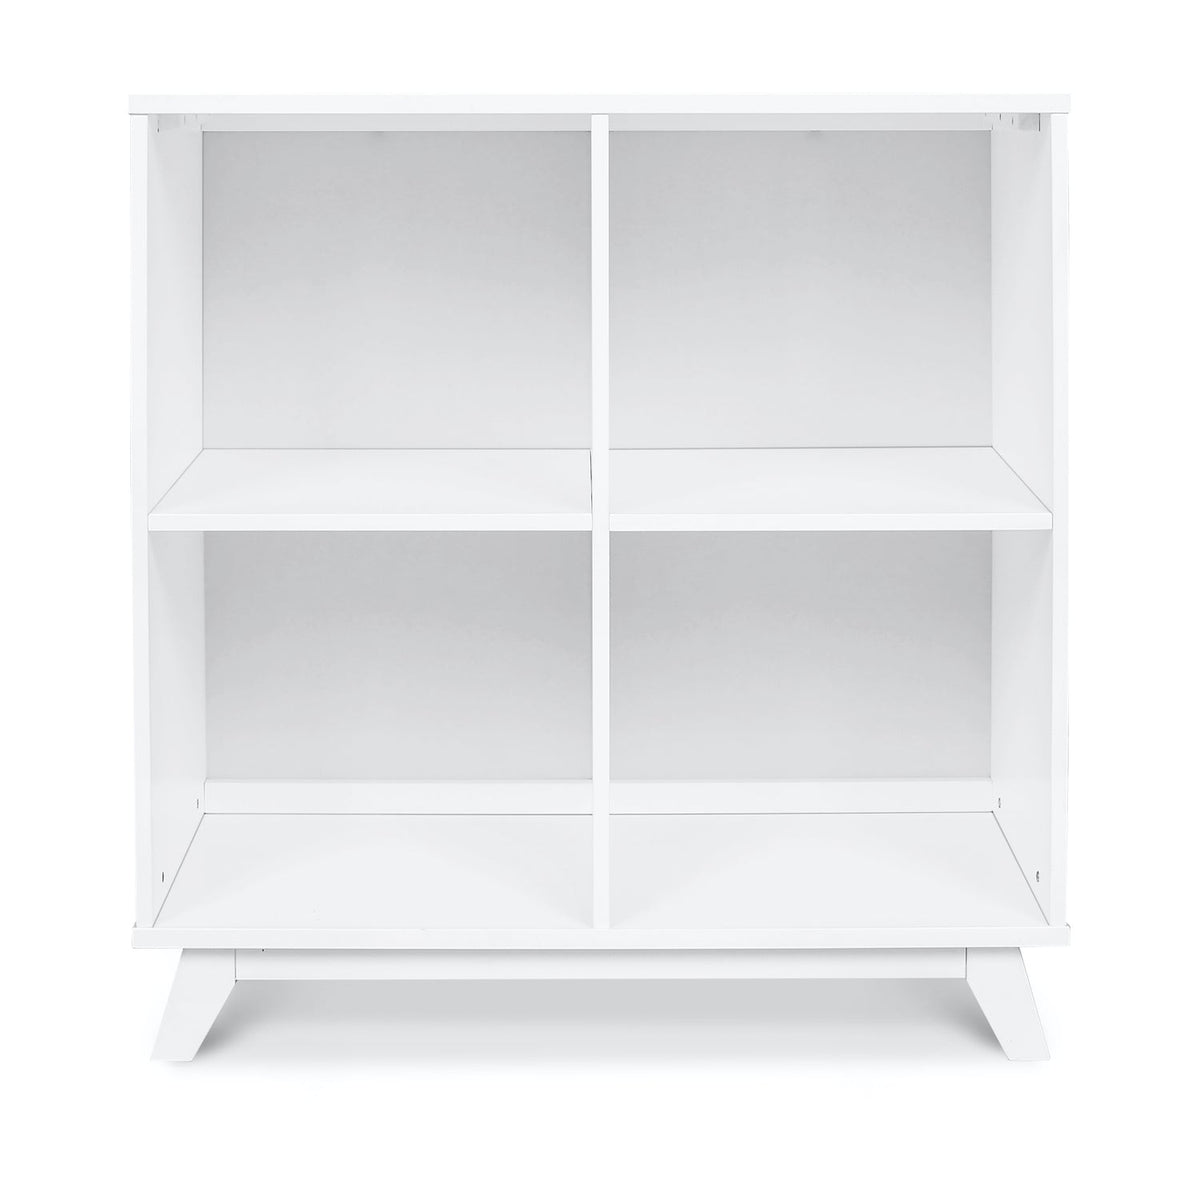 Otto Convertible Changing Table and Cubby Bookcase - White - Project Nursery